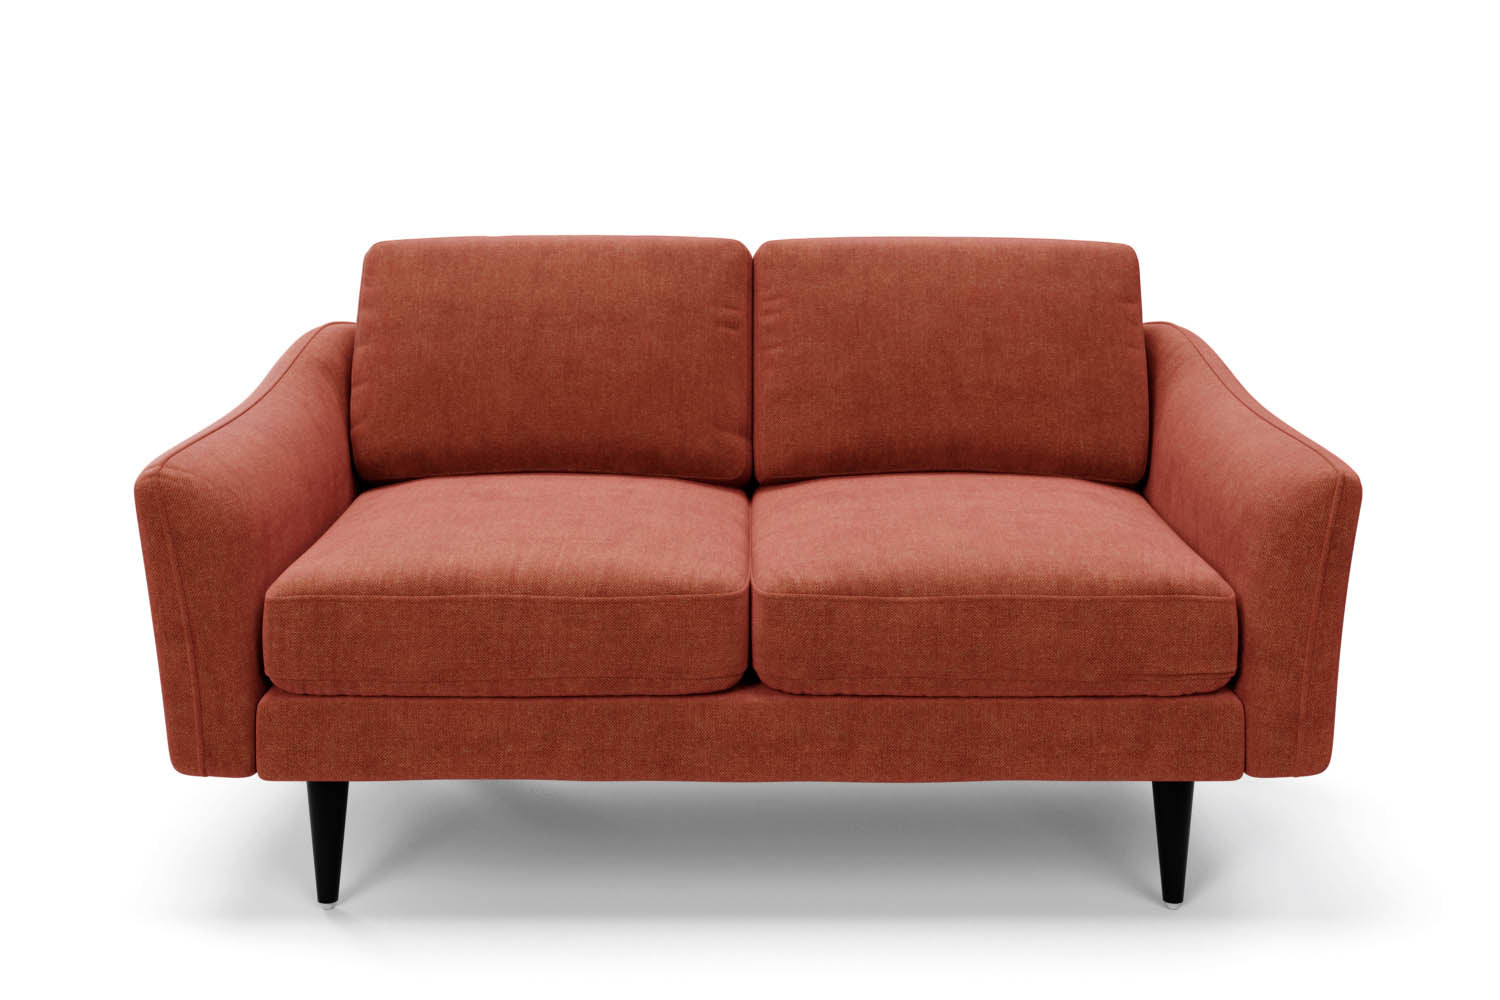 The Rebel 2 Seater Sofa in Spice with black legs front variant_40886276325424